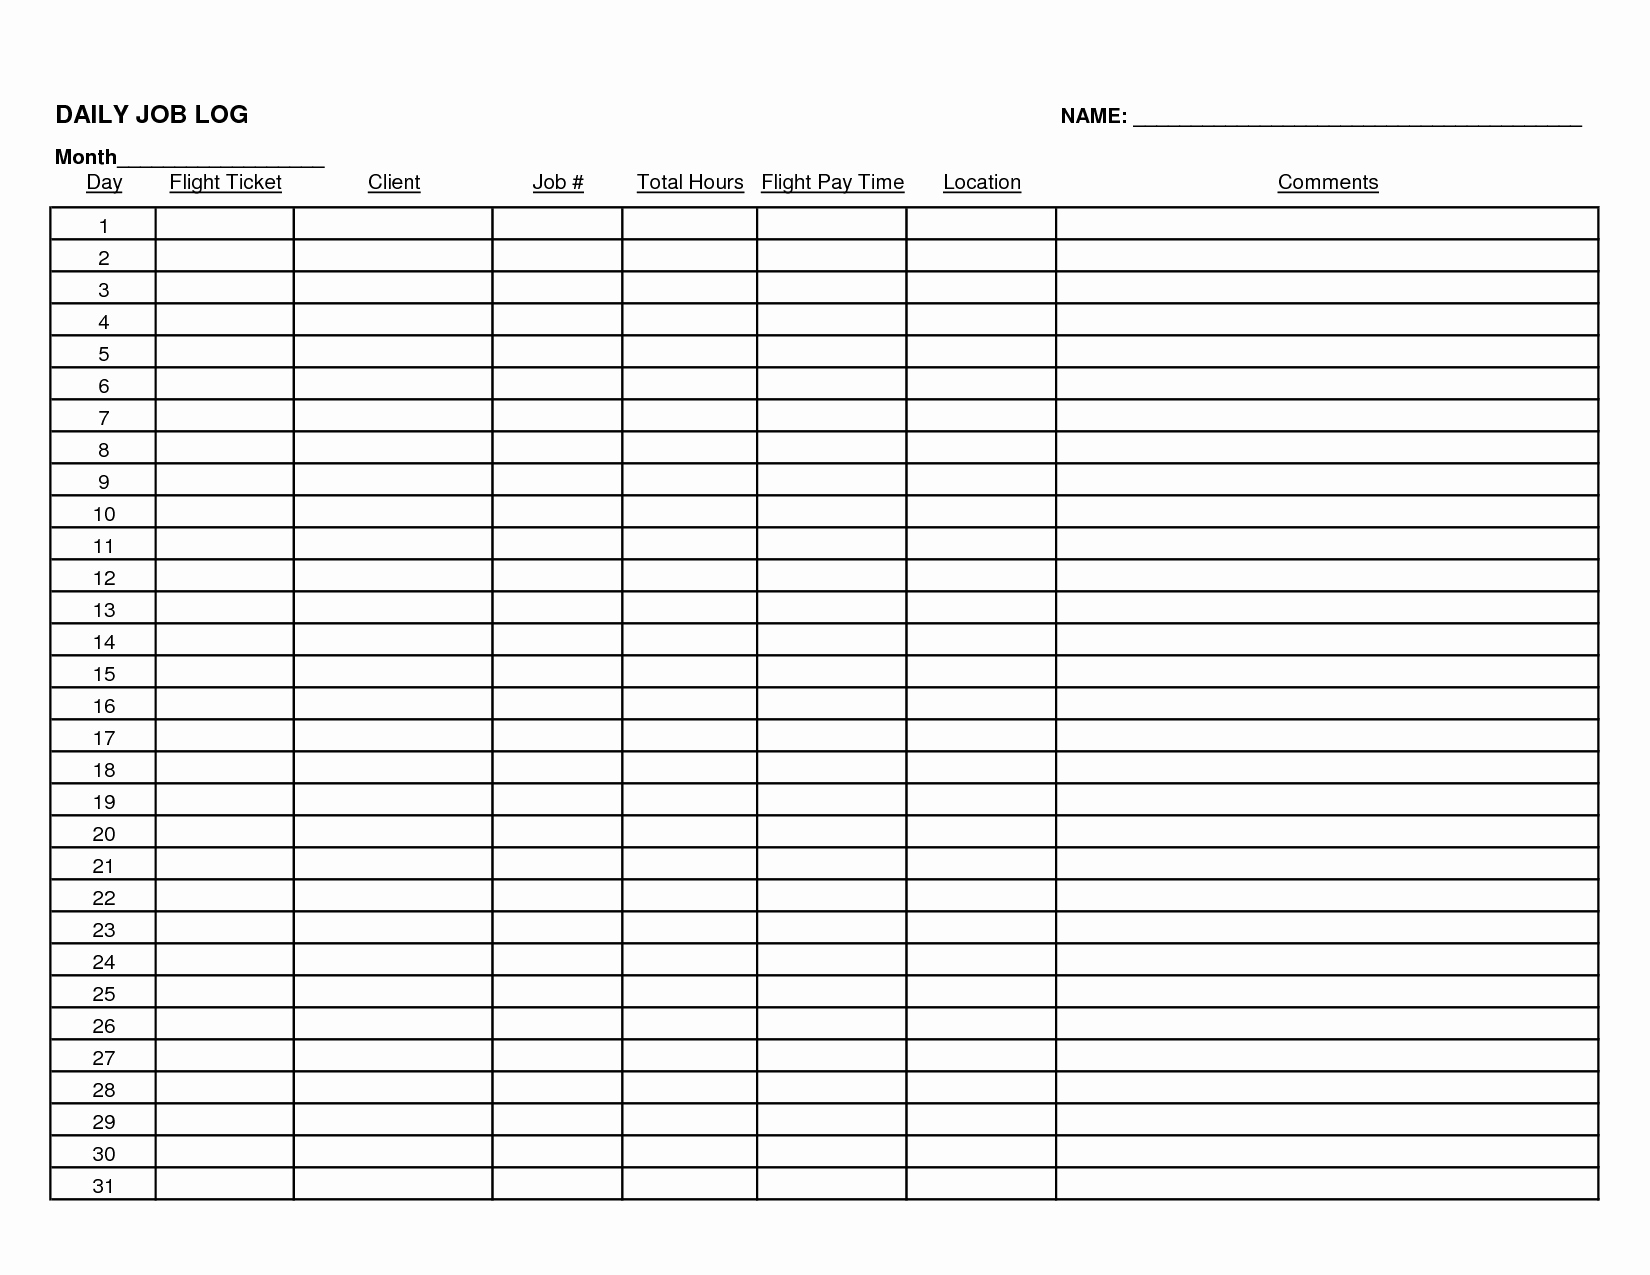 Daily Log Template Excel Elegant 6 Best Of Daily Log Template Daily Job Log